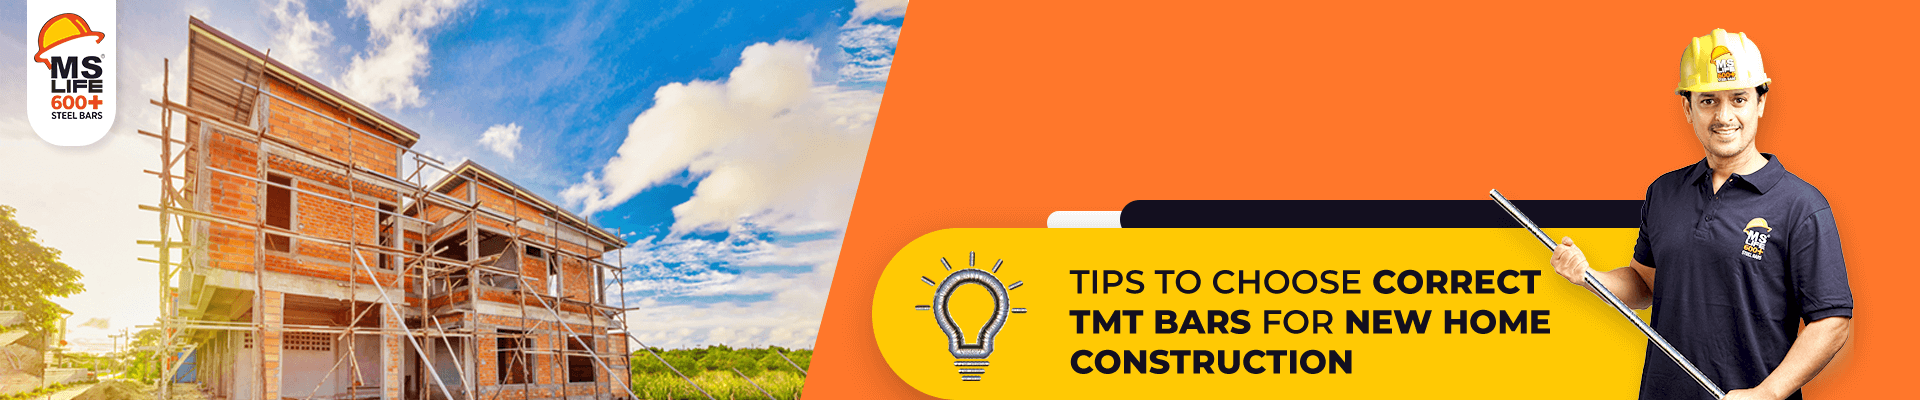 Tips to choose correct TMT Bars for New Home Construction | MSlife